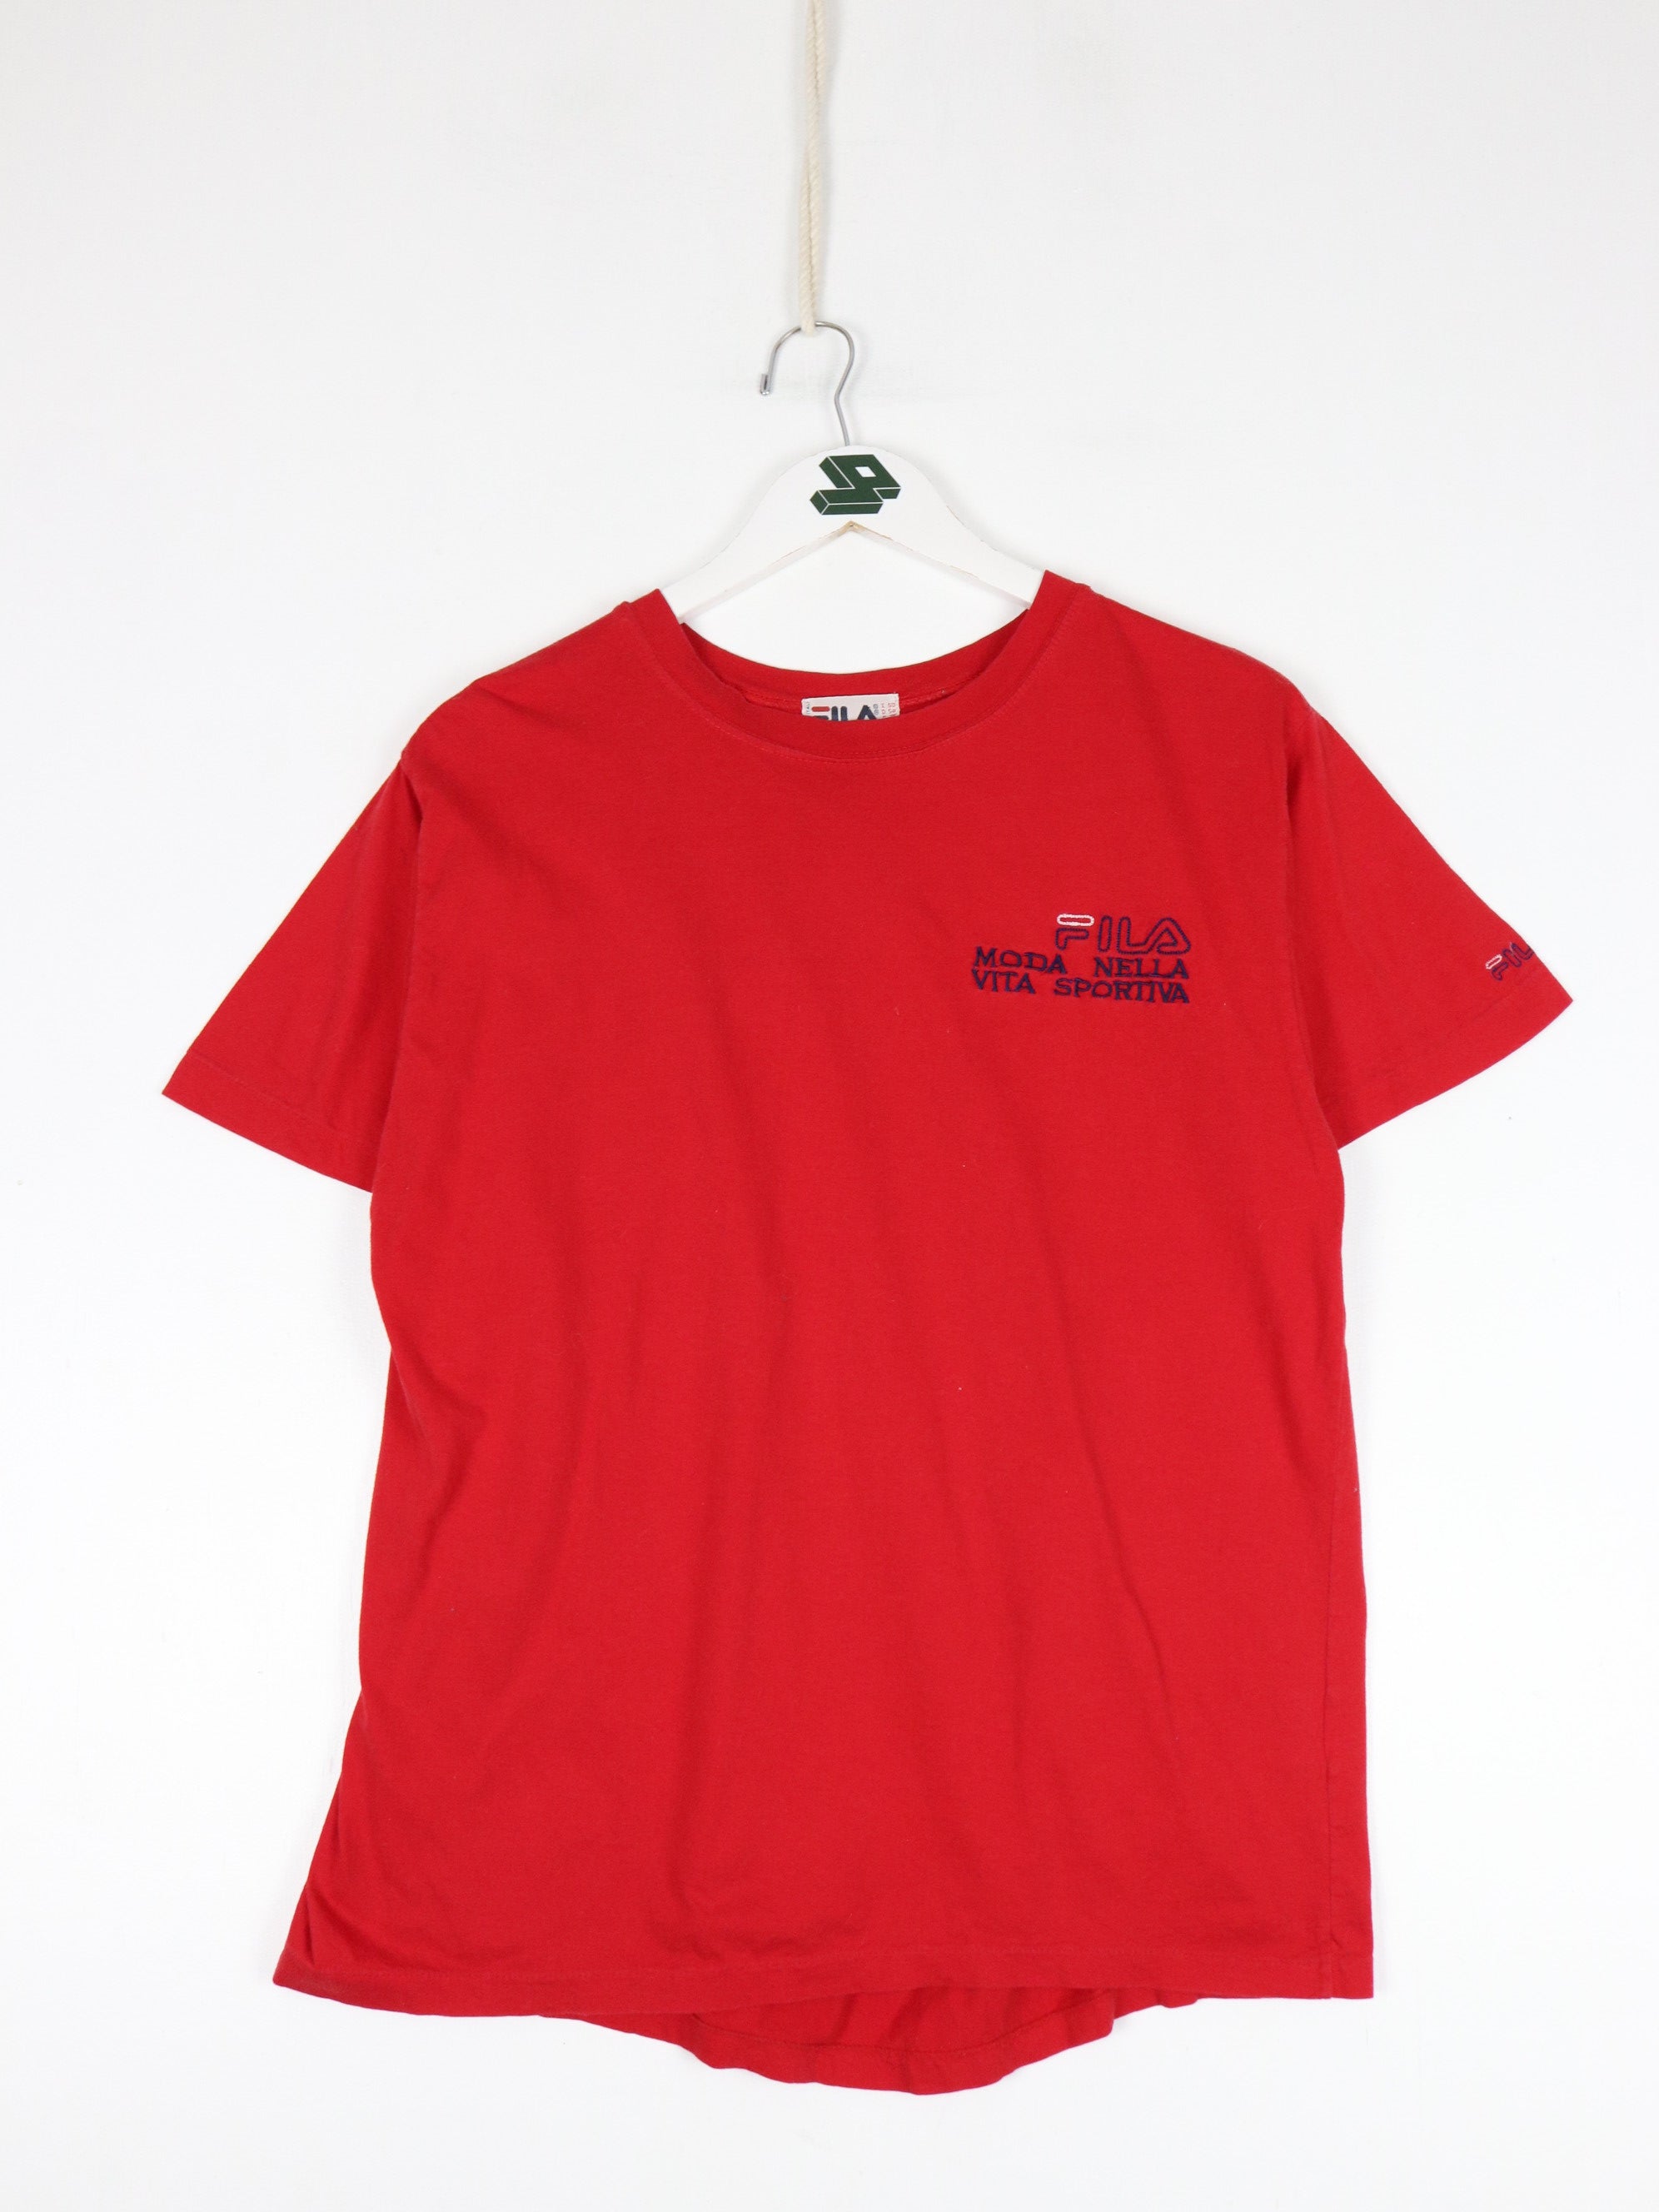 Vintage Sportswear T Shirt Youth Small Red 80s – Proper Vintage